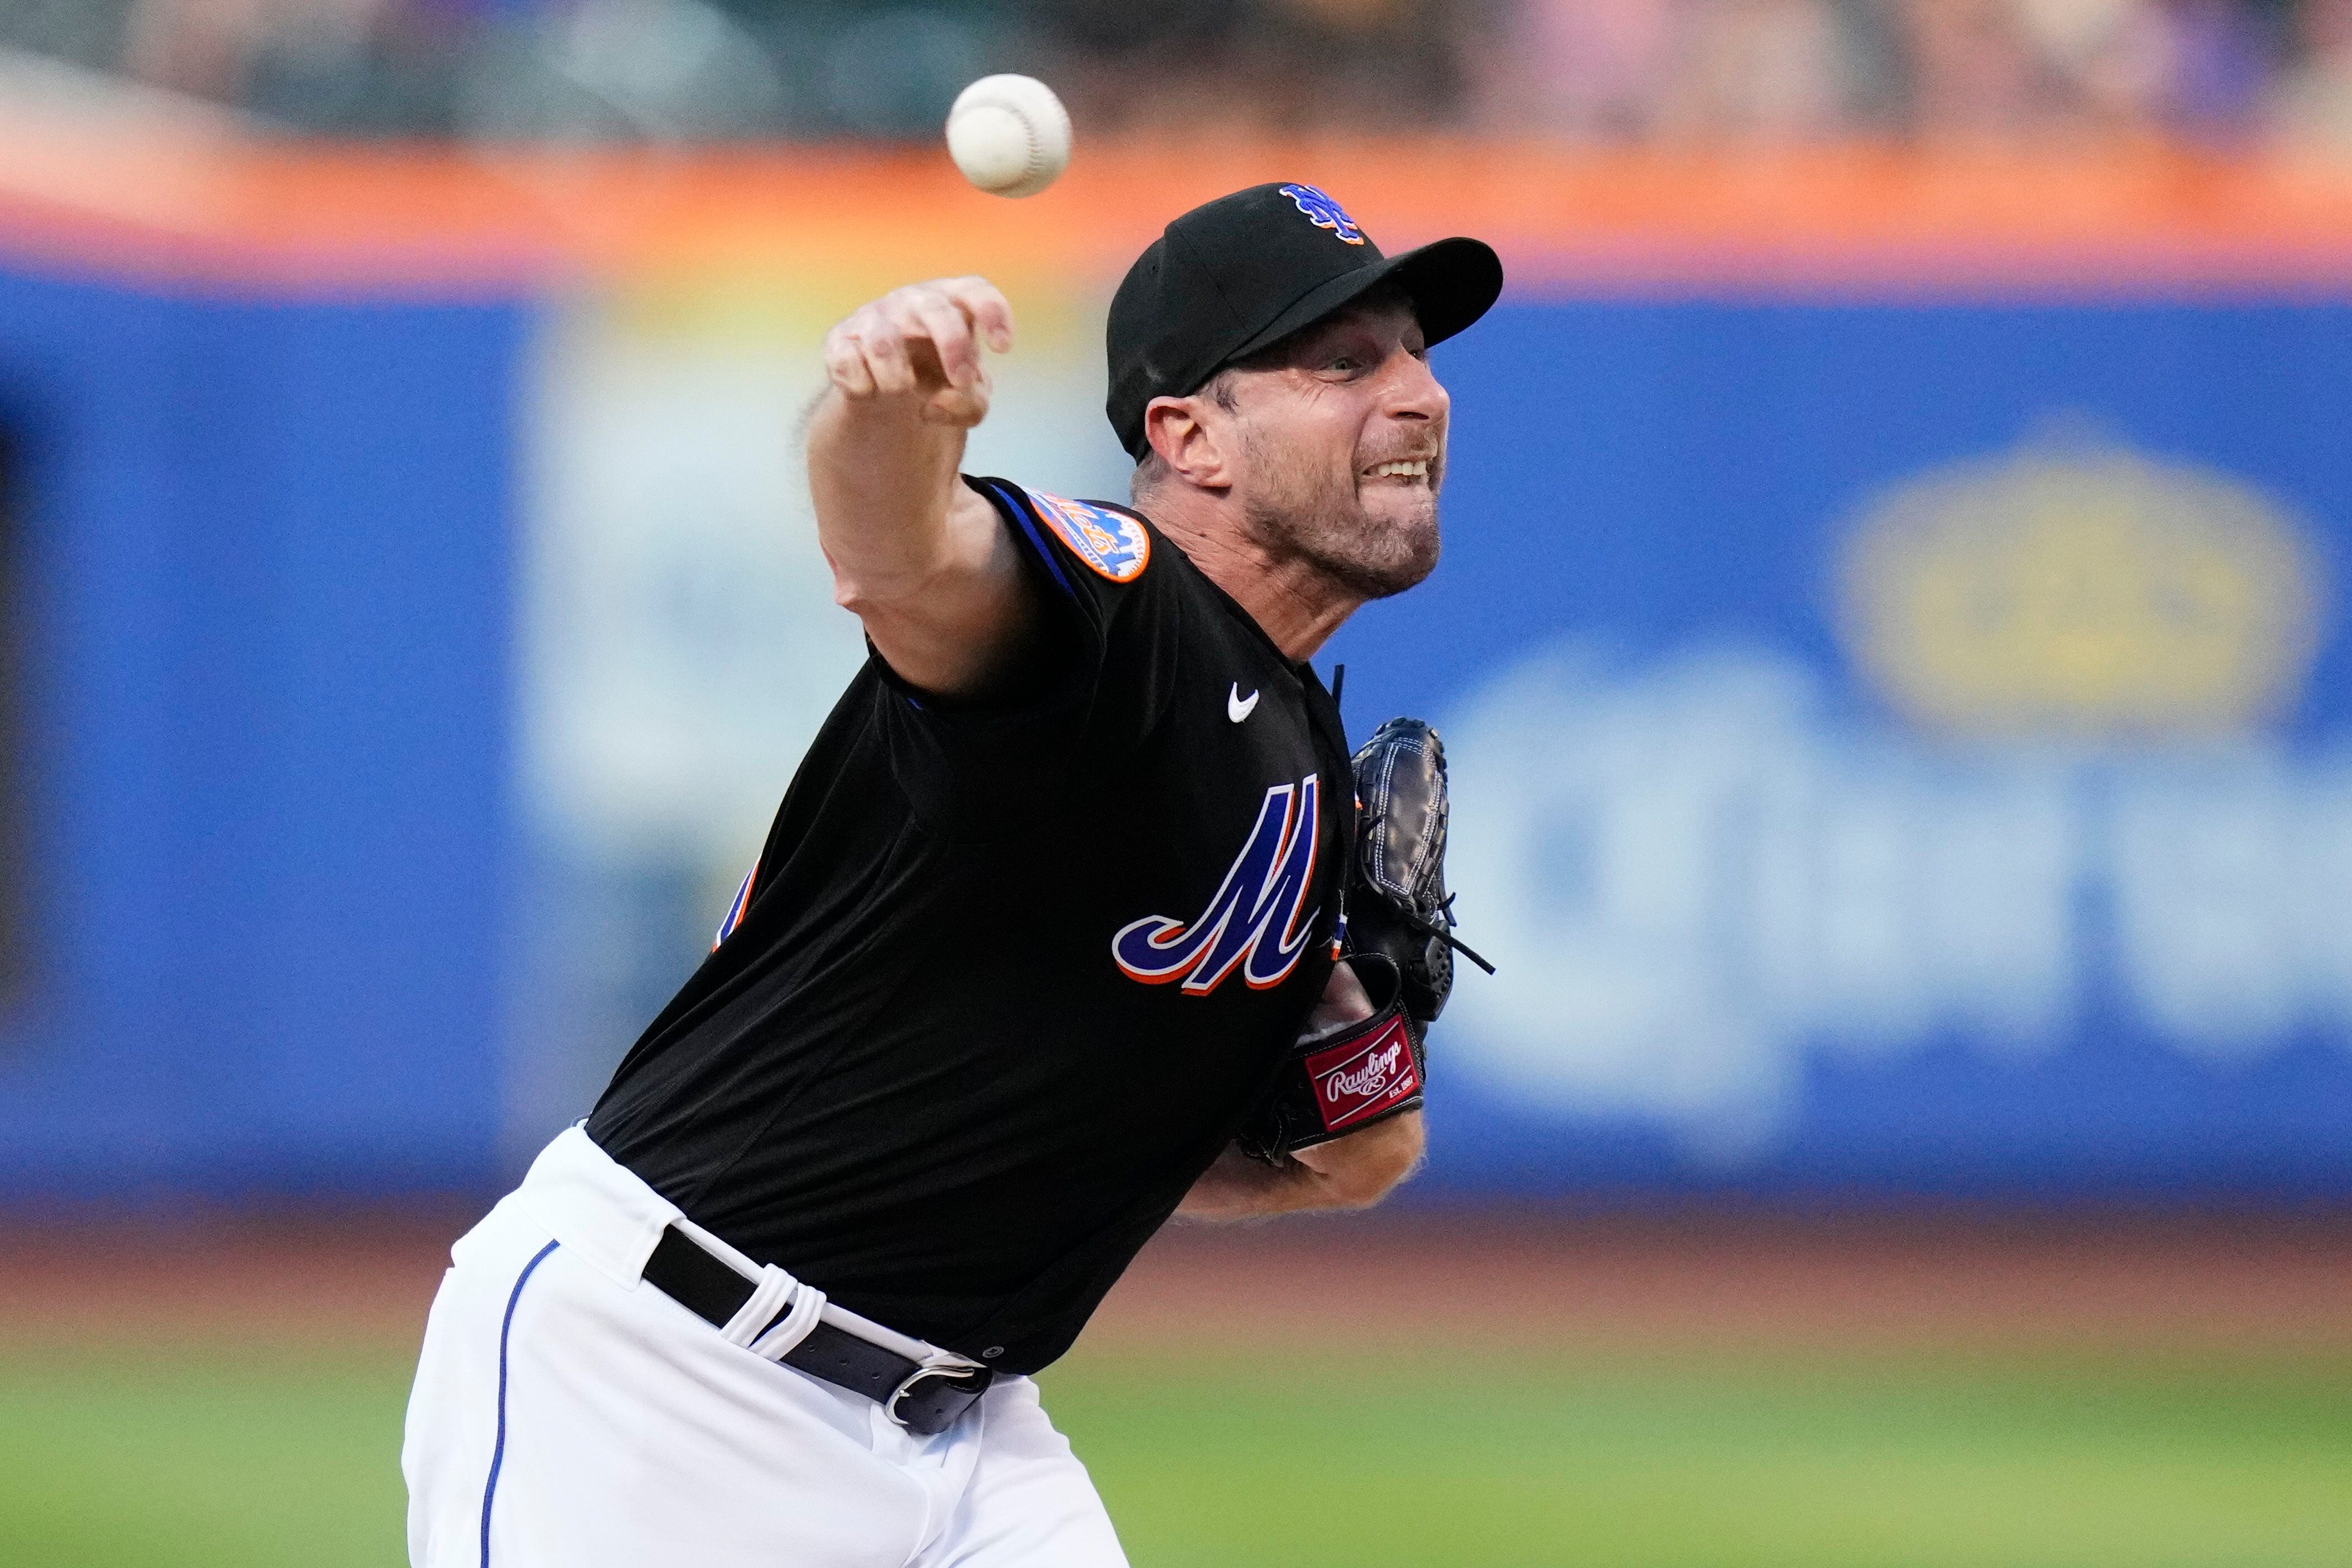 Scherzer costs Texas $22.5M, with Mets to pay Rangers just over $35.5M  through 2024